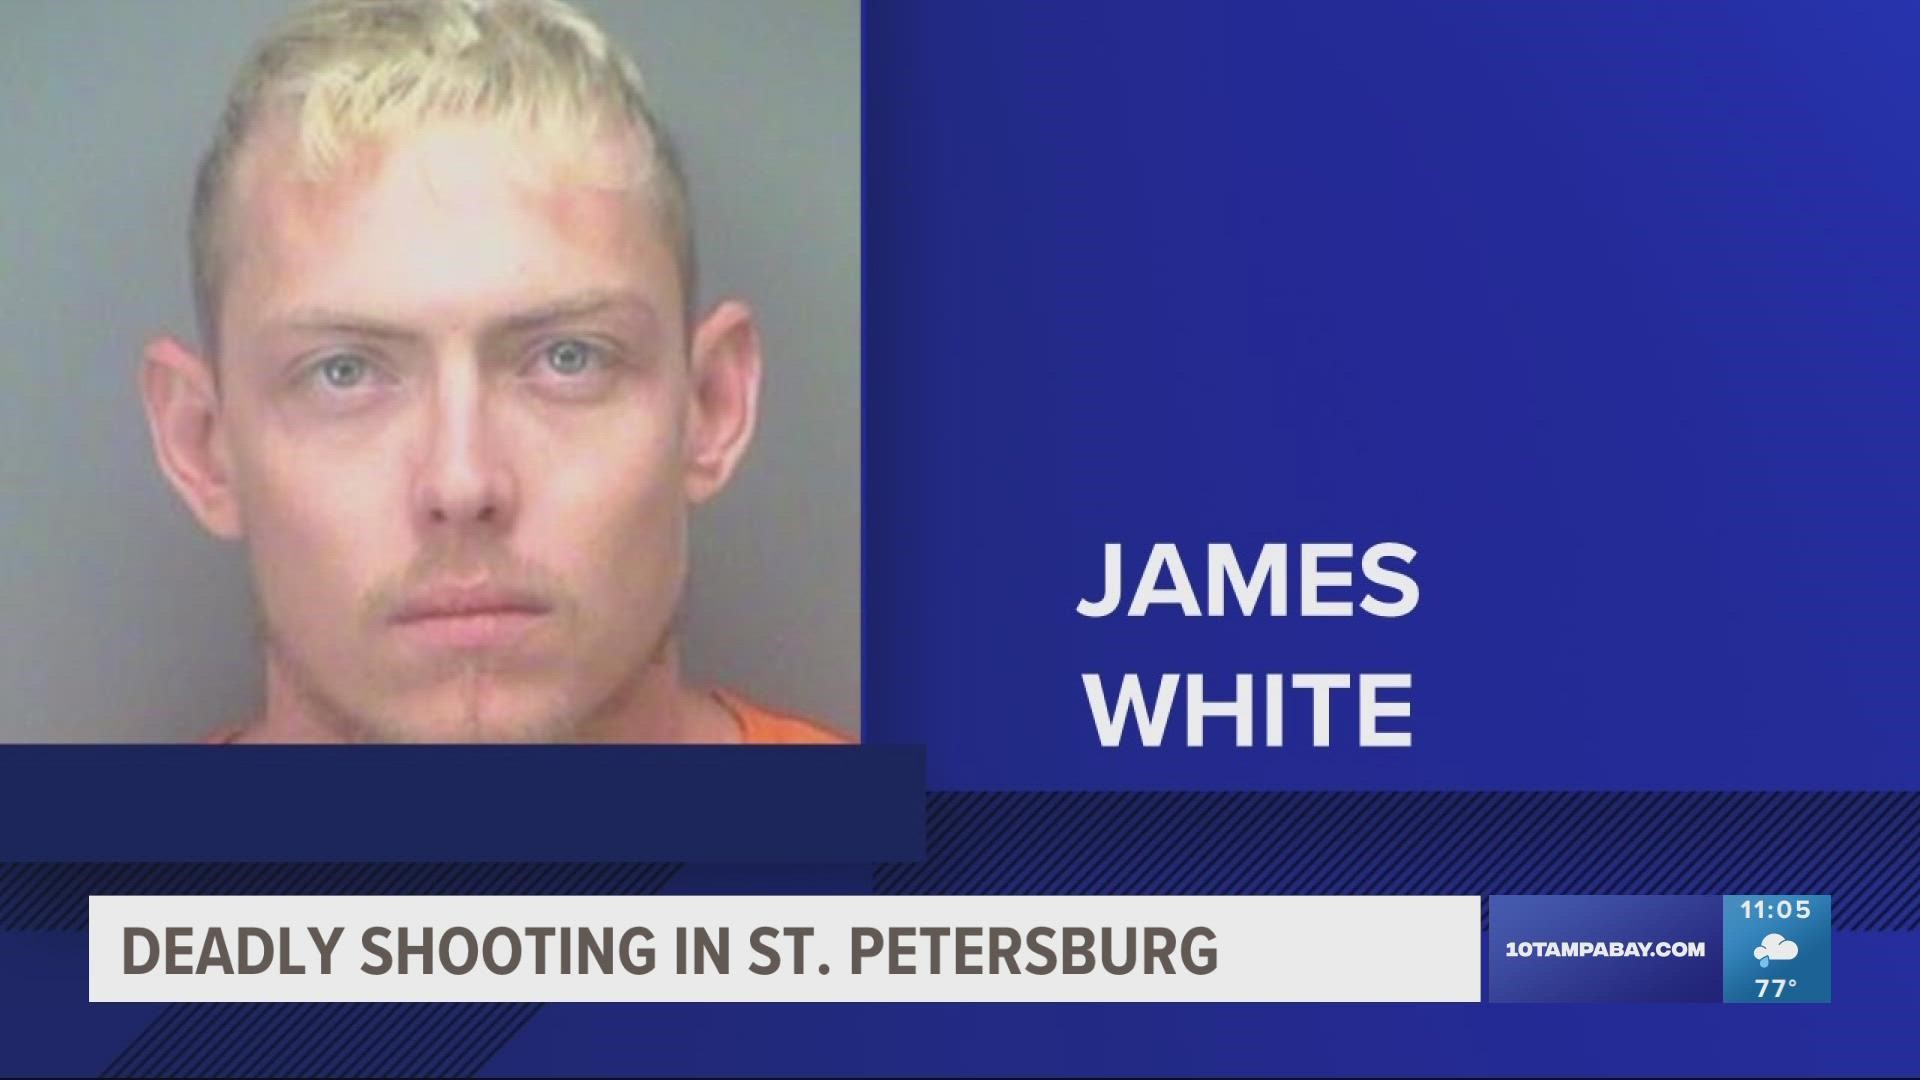 Police have arrested a man, James White, in connection with shooting and killing a 29-year-old man in St. Petersburg, police say.